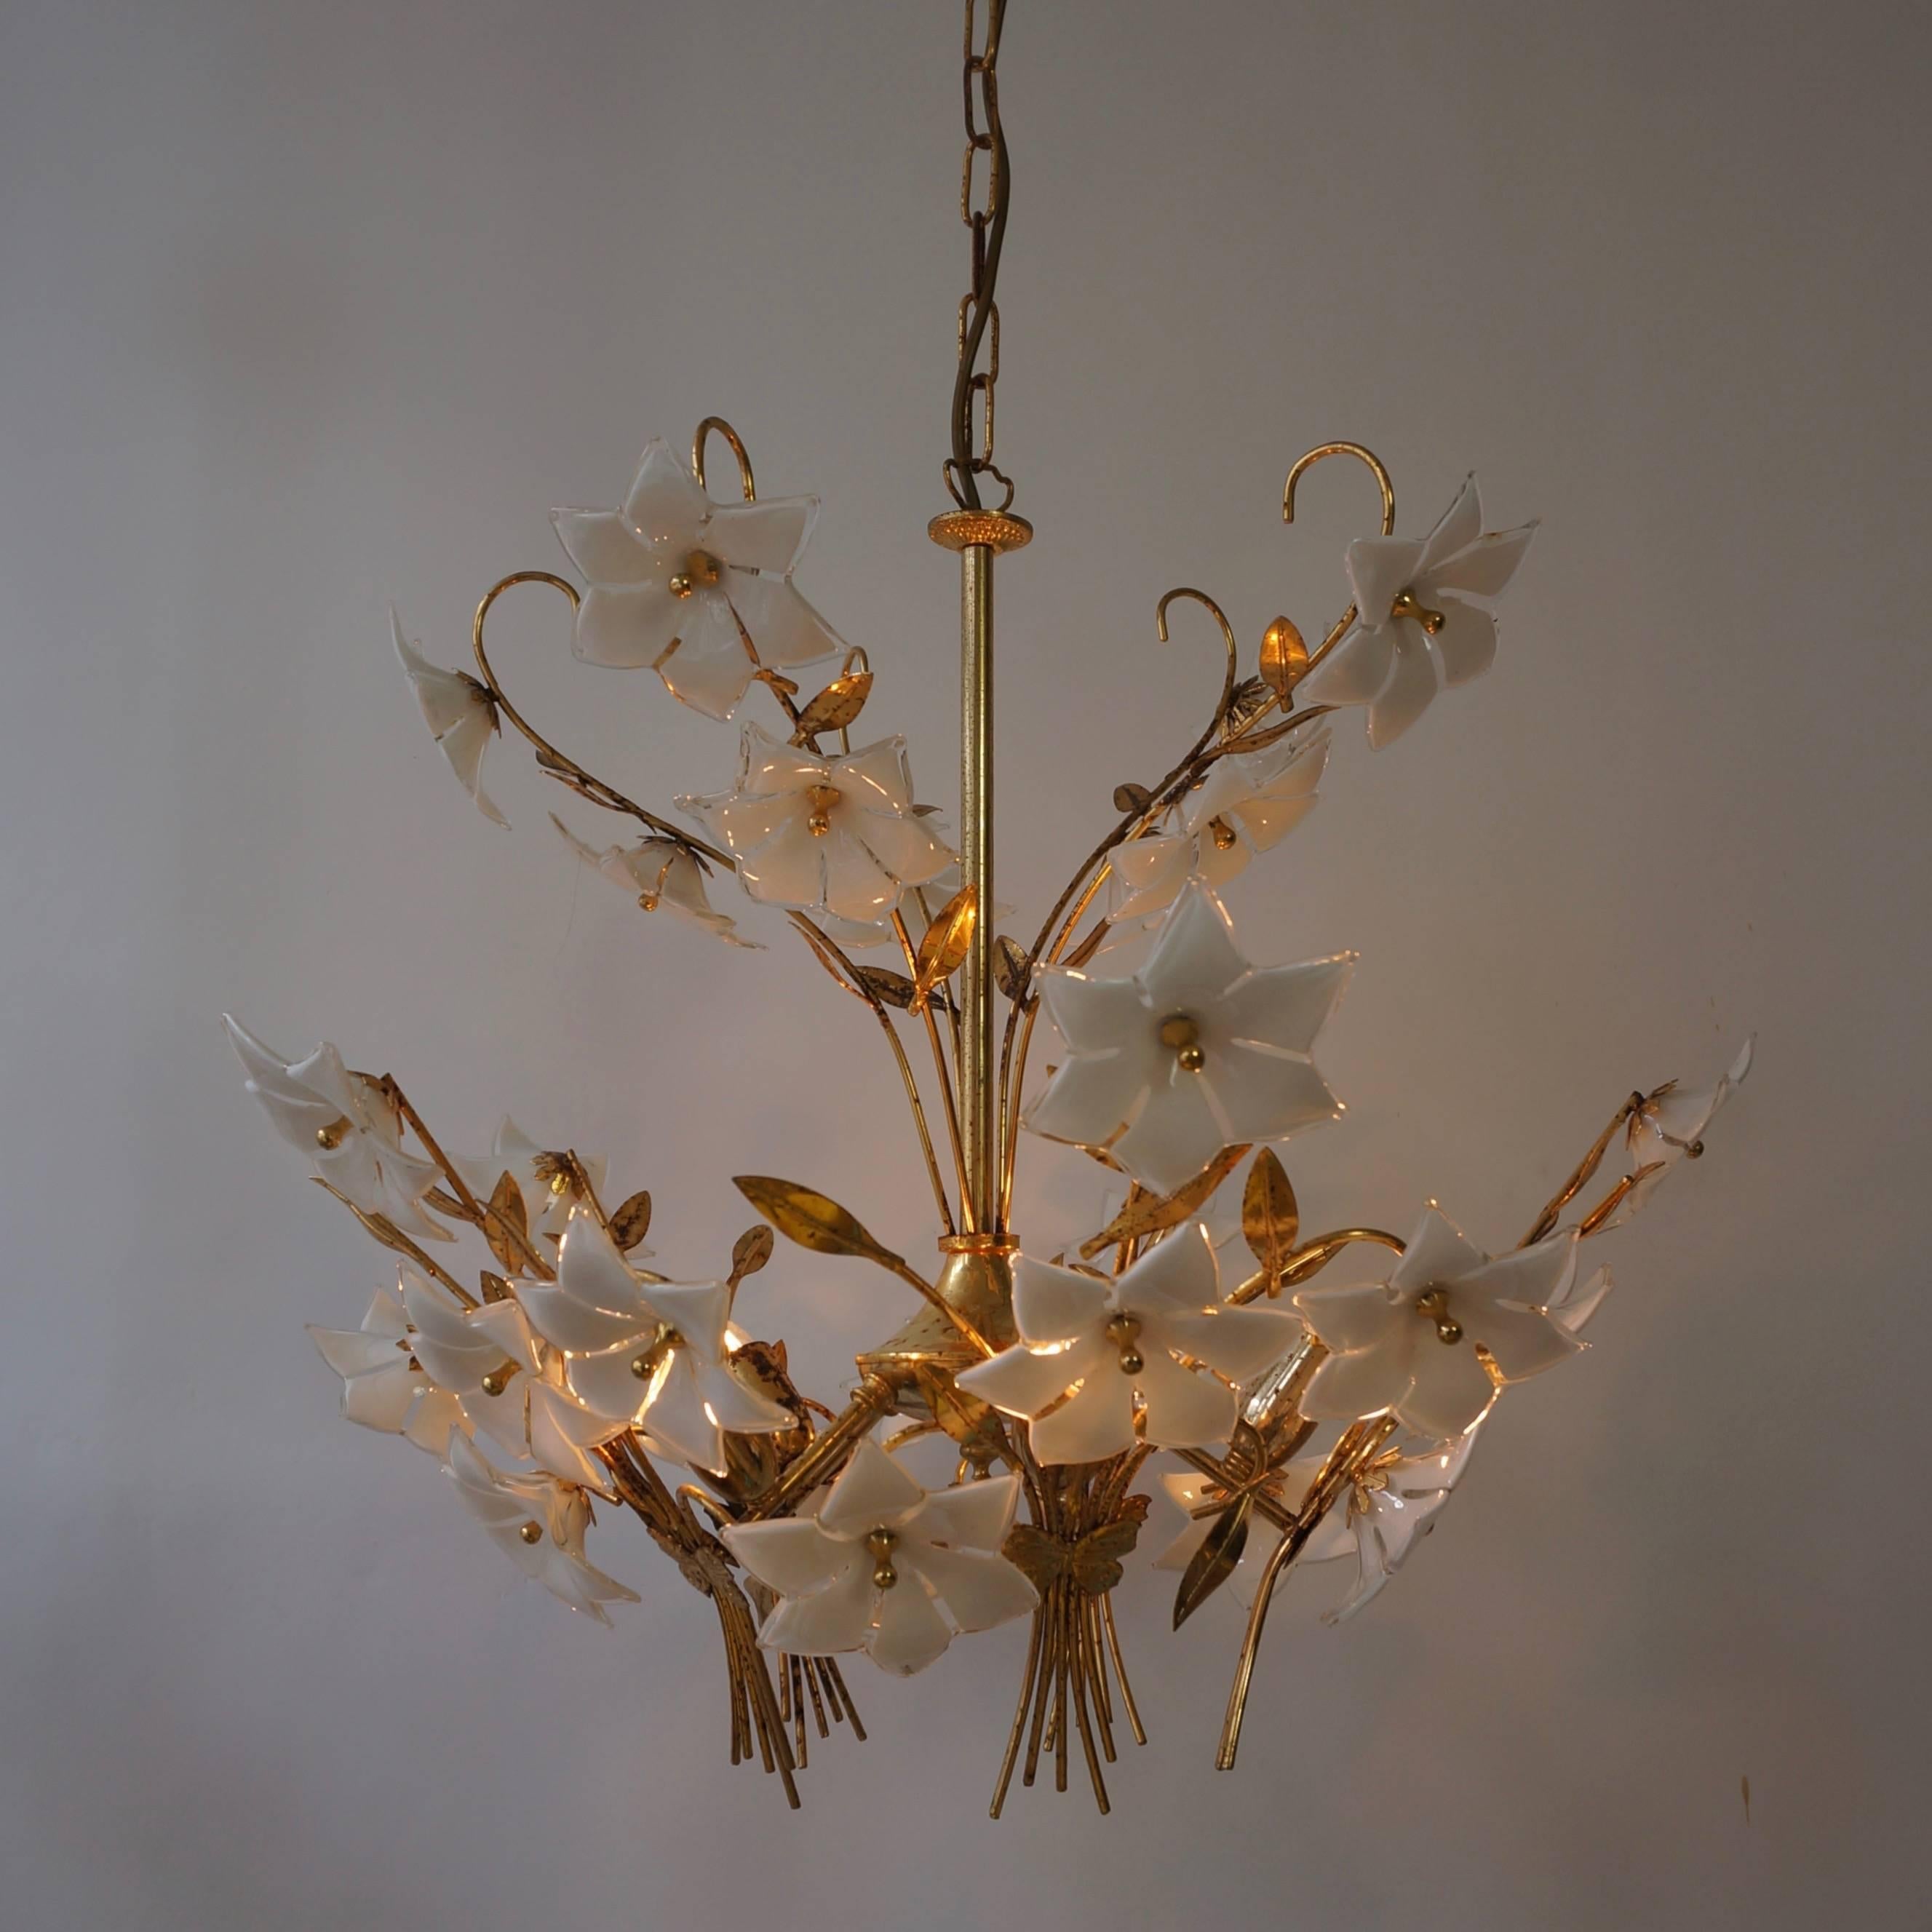 Italian Murano glass and brass chandelier with 30 glass flowers.
Total height with the chain is 115 cm.
Diameter: 60 cm.
Six E14 bulbs.